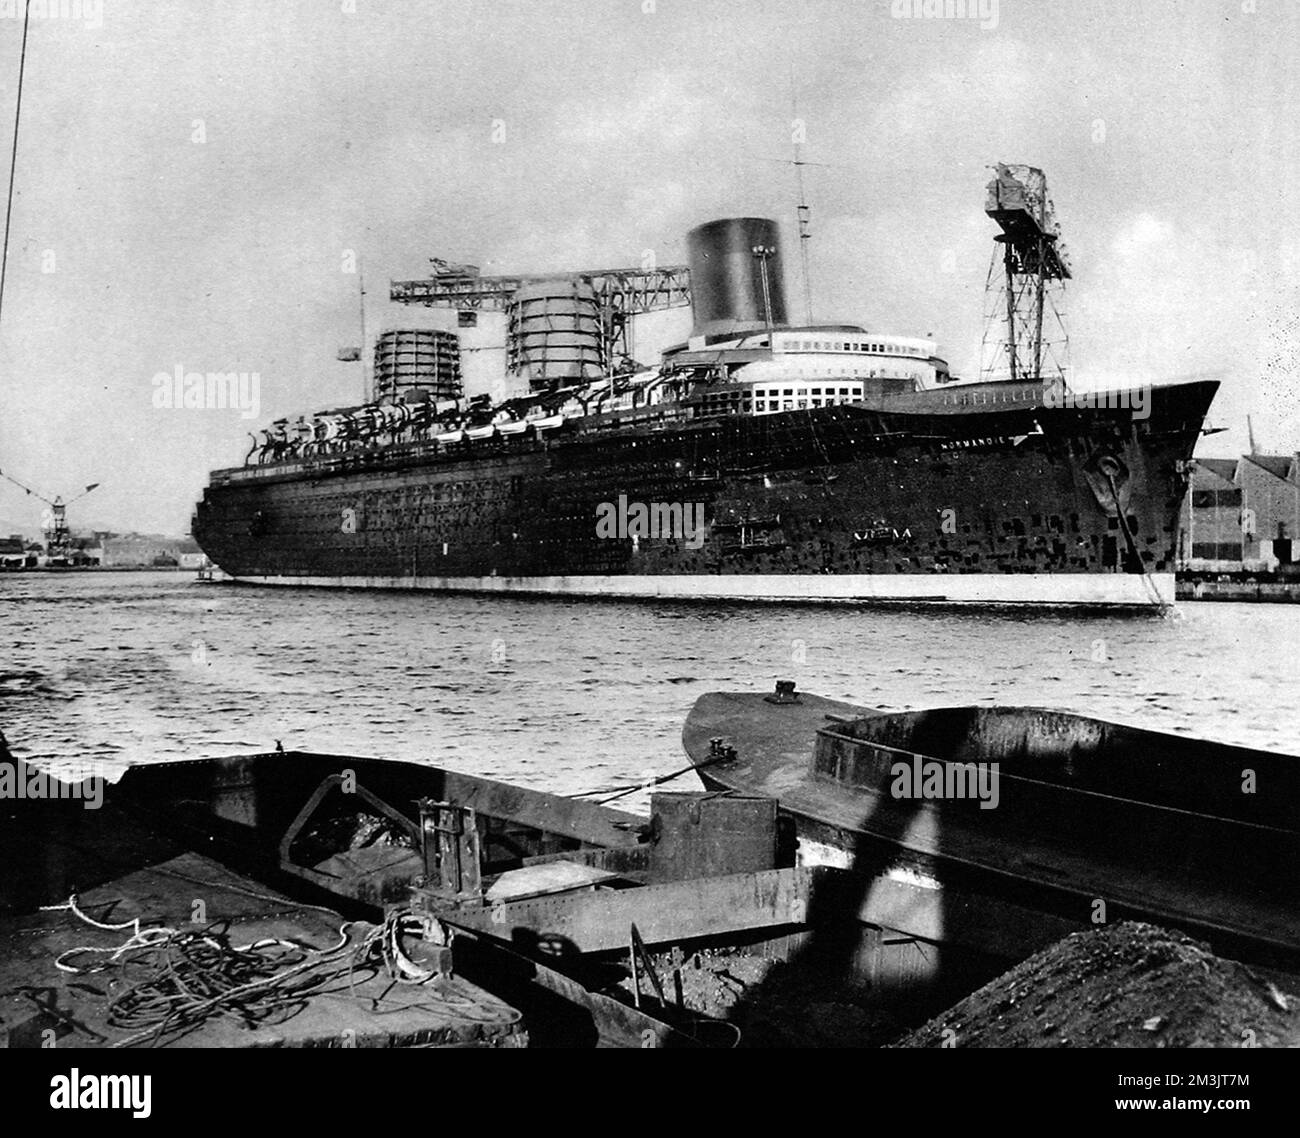 The liner 'Normandie' at St. Nazaire, February 1935. Launched in 1932, it took three years to fit her out. When she made her maiden voyage to New York in June 1935, she captured the Blue Riband quite easily, with a crossing of 4 days and three hours. Stock Photo